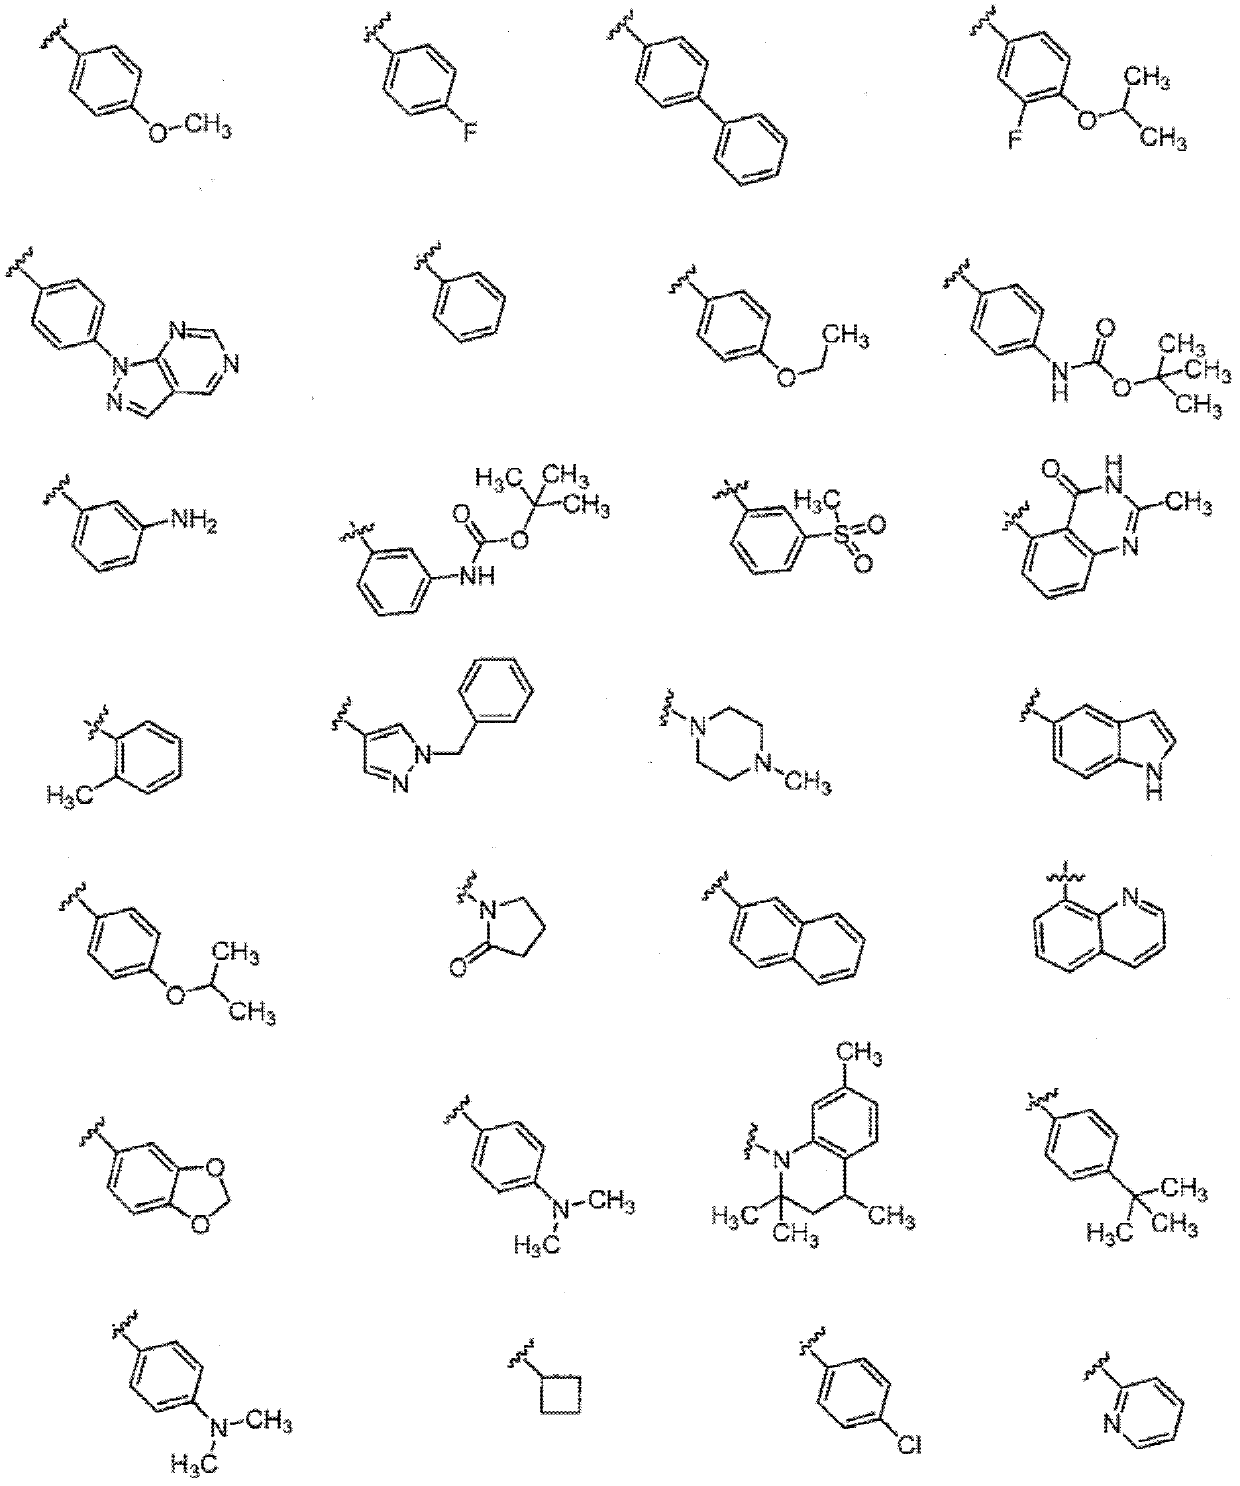 Compounds and methods of use